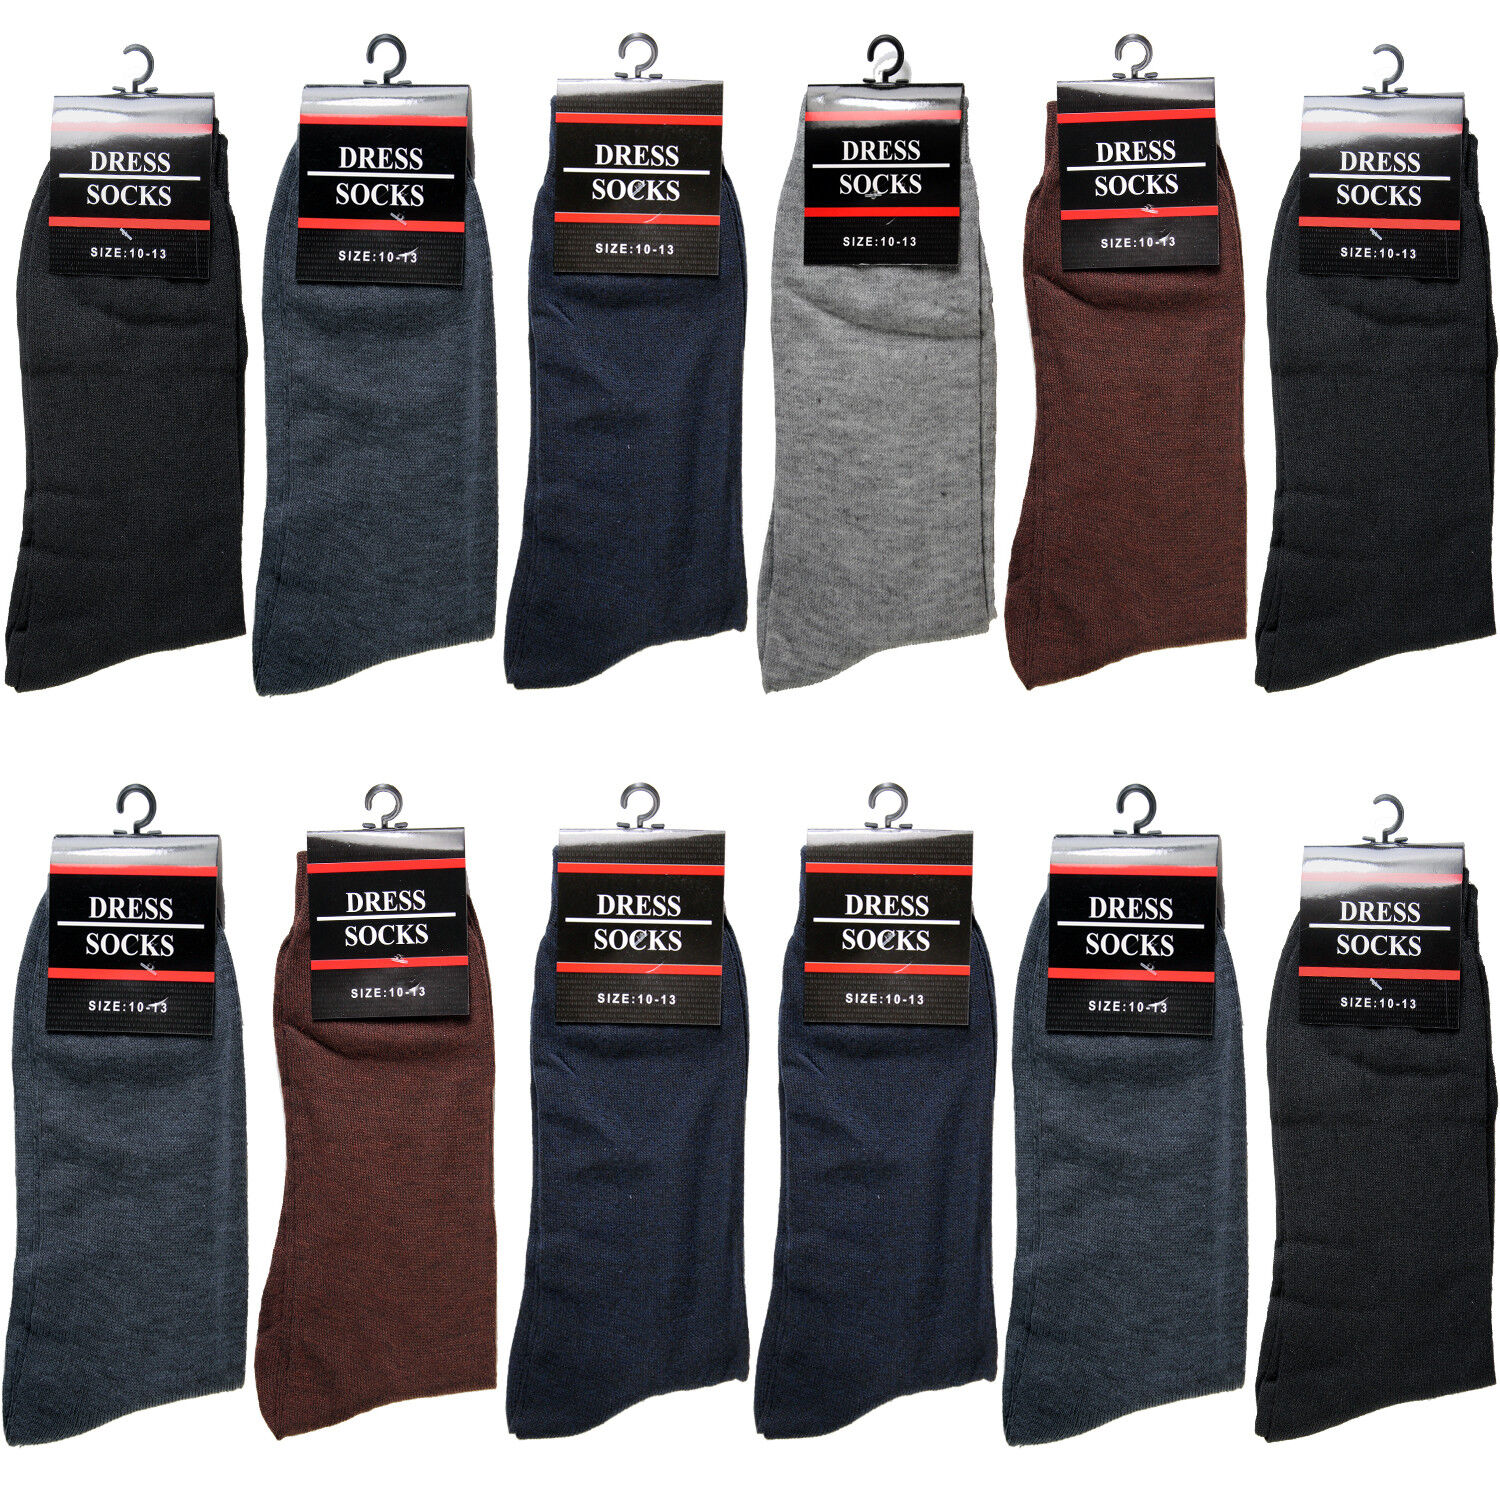 New 12 Pairs Mens Dress Socks Fashion Casual Crew Multi Color Cotton Size 10-13